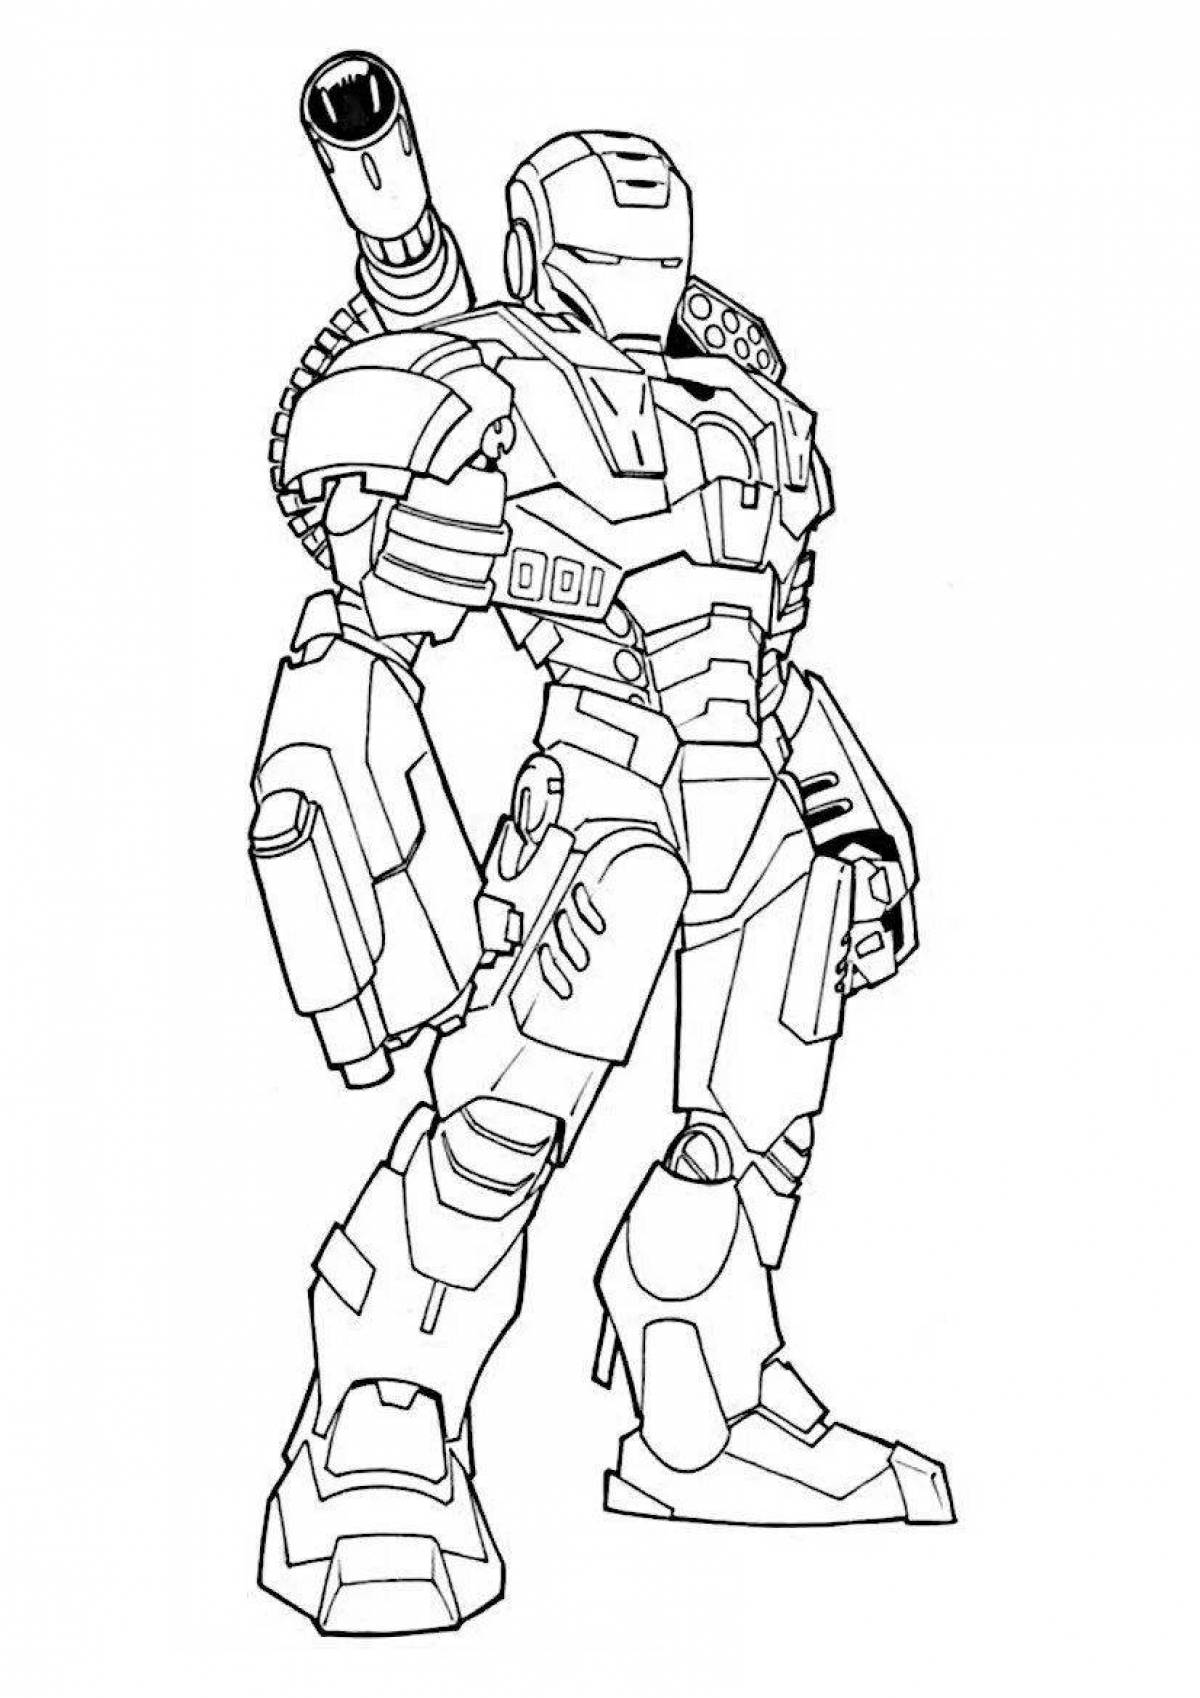 Relentless warrior coloring page